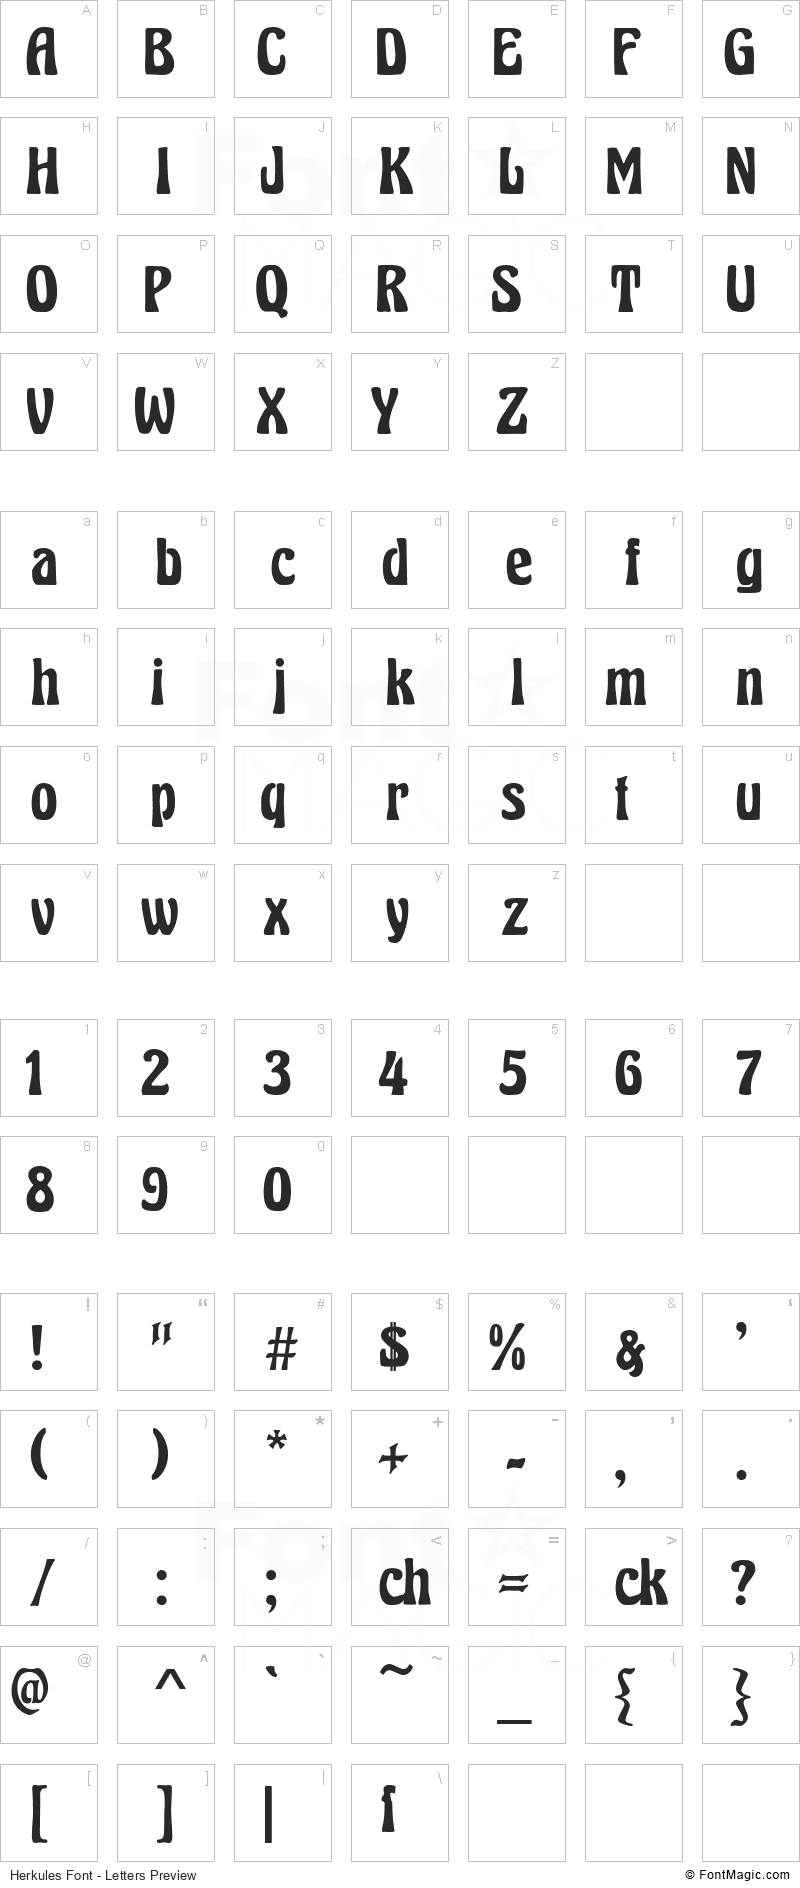 Herkules Font - All Latters Preview Chart